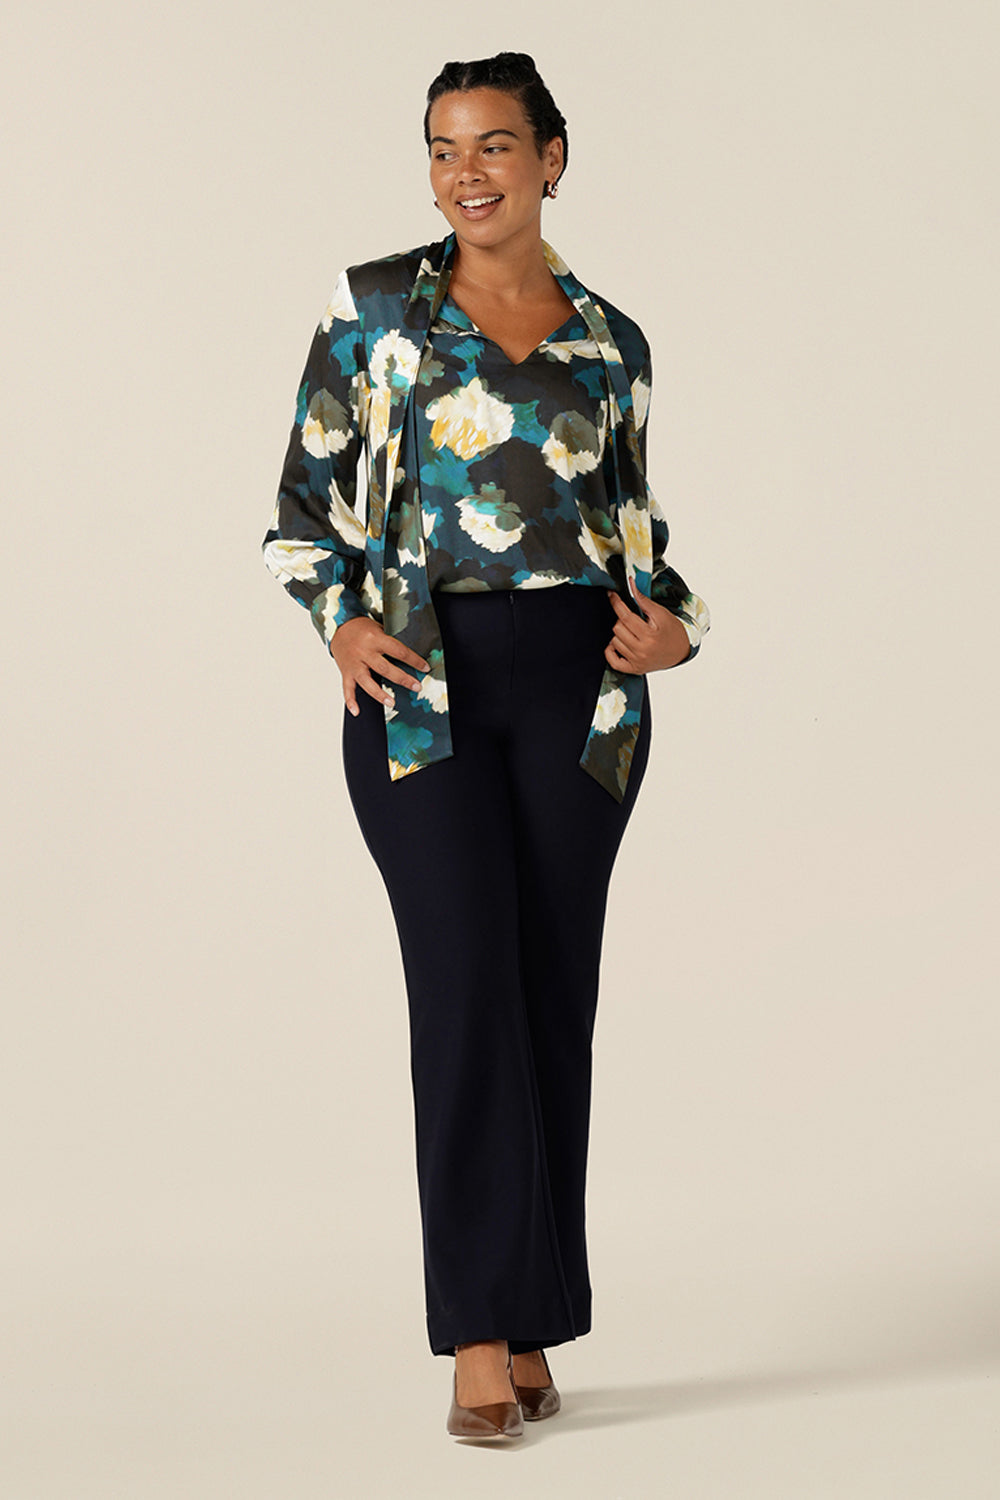 A luxe pull-on shirt in abstract floral print, the Matisse Shirt in Pom Pom has a V-neckline with pussy bow neck ties and long, bishop sleeves that blouson over fitted cuffs. Worn with flared leg, tailored pants in navy, this is an elegant workwear shirts.